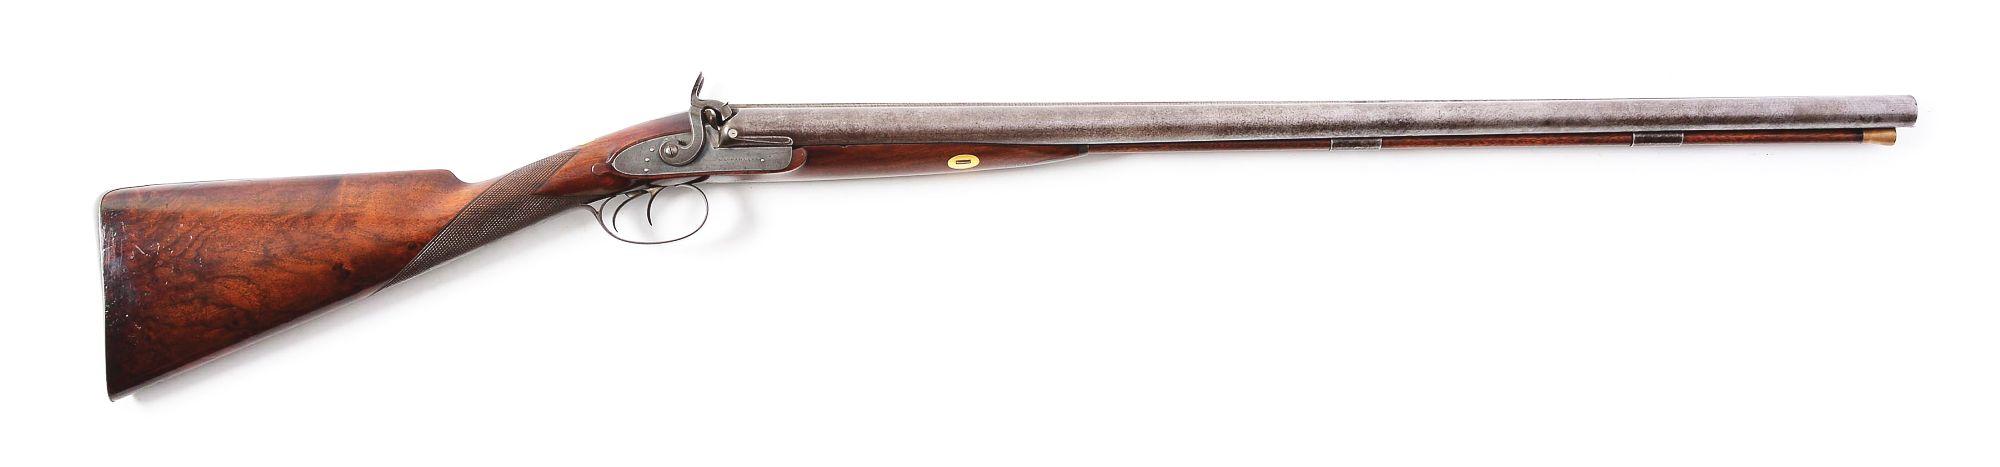 (A) Intriguing Doubled Barreled Percussion Shotgun by Andrew MacFarlane of New York.